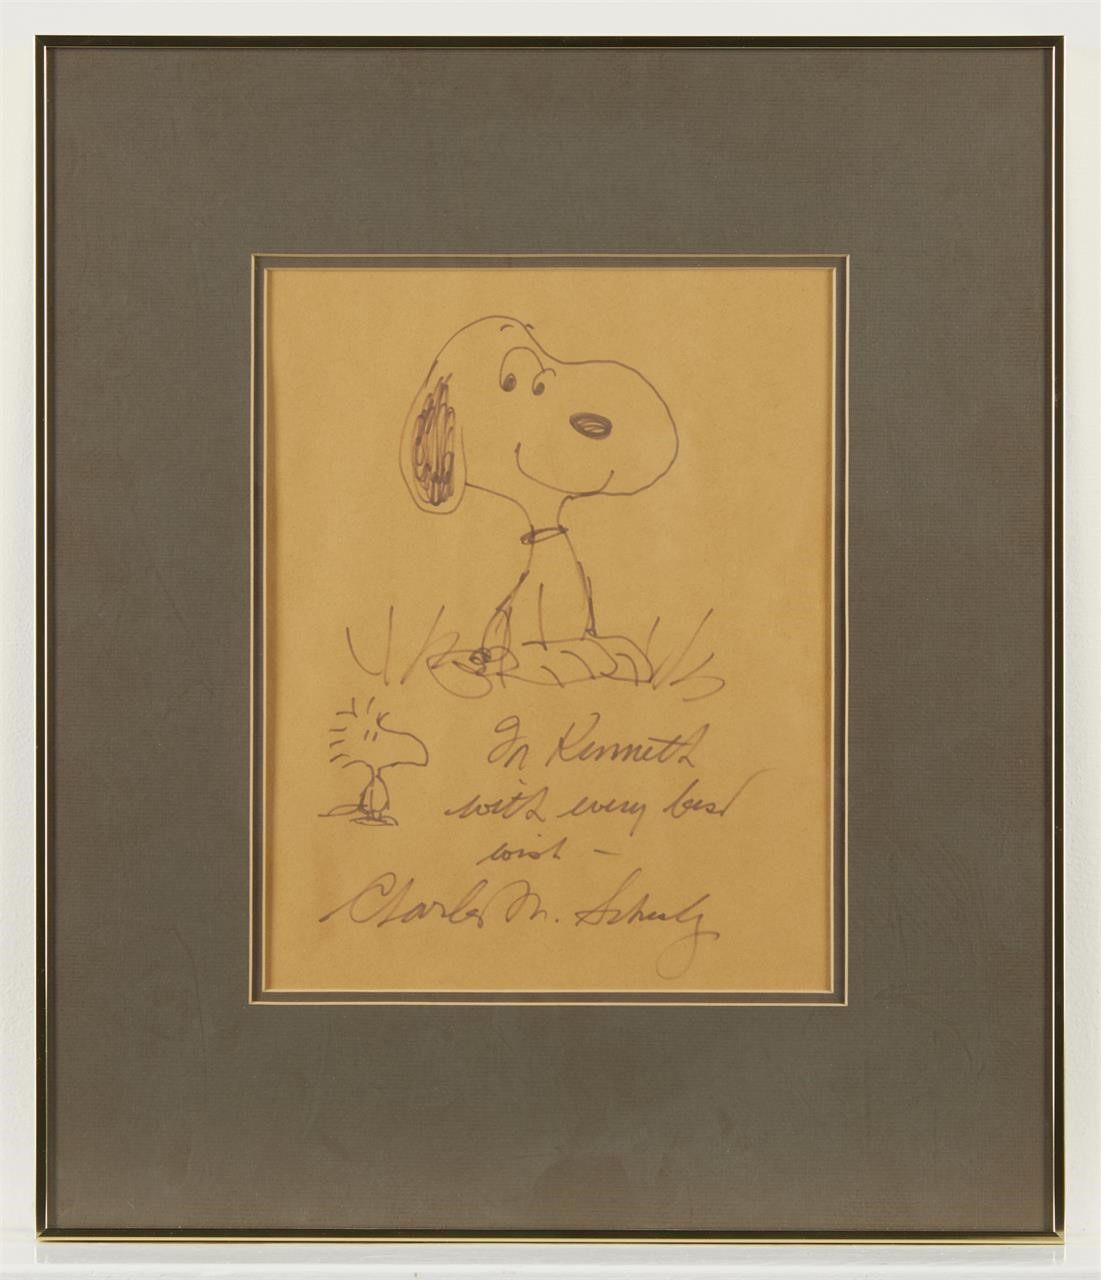 Snoopy & Friends: A "Peanuts" Auction